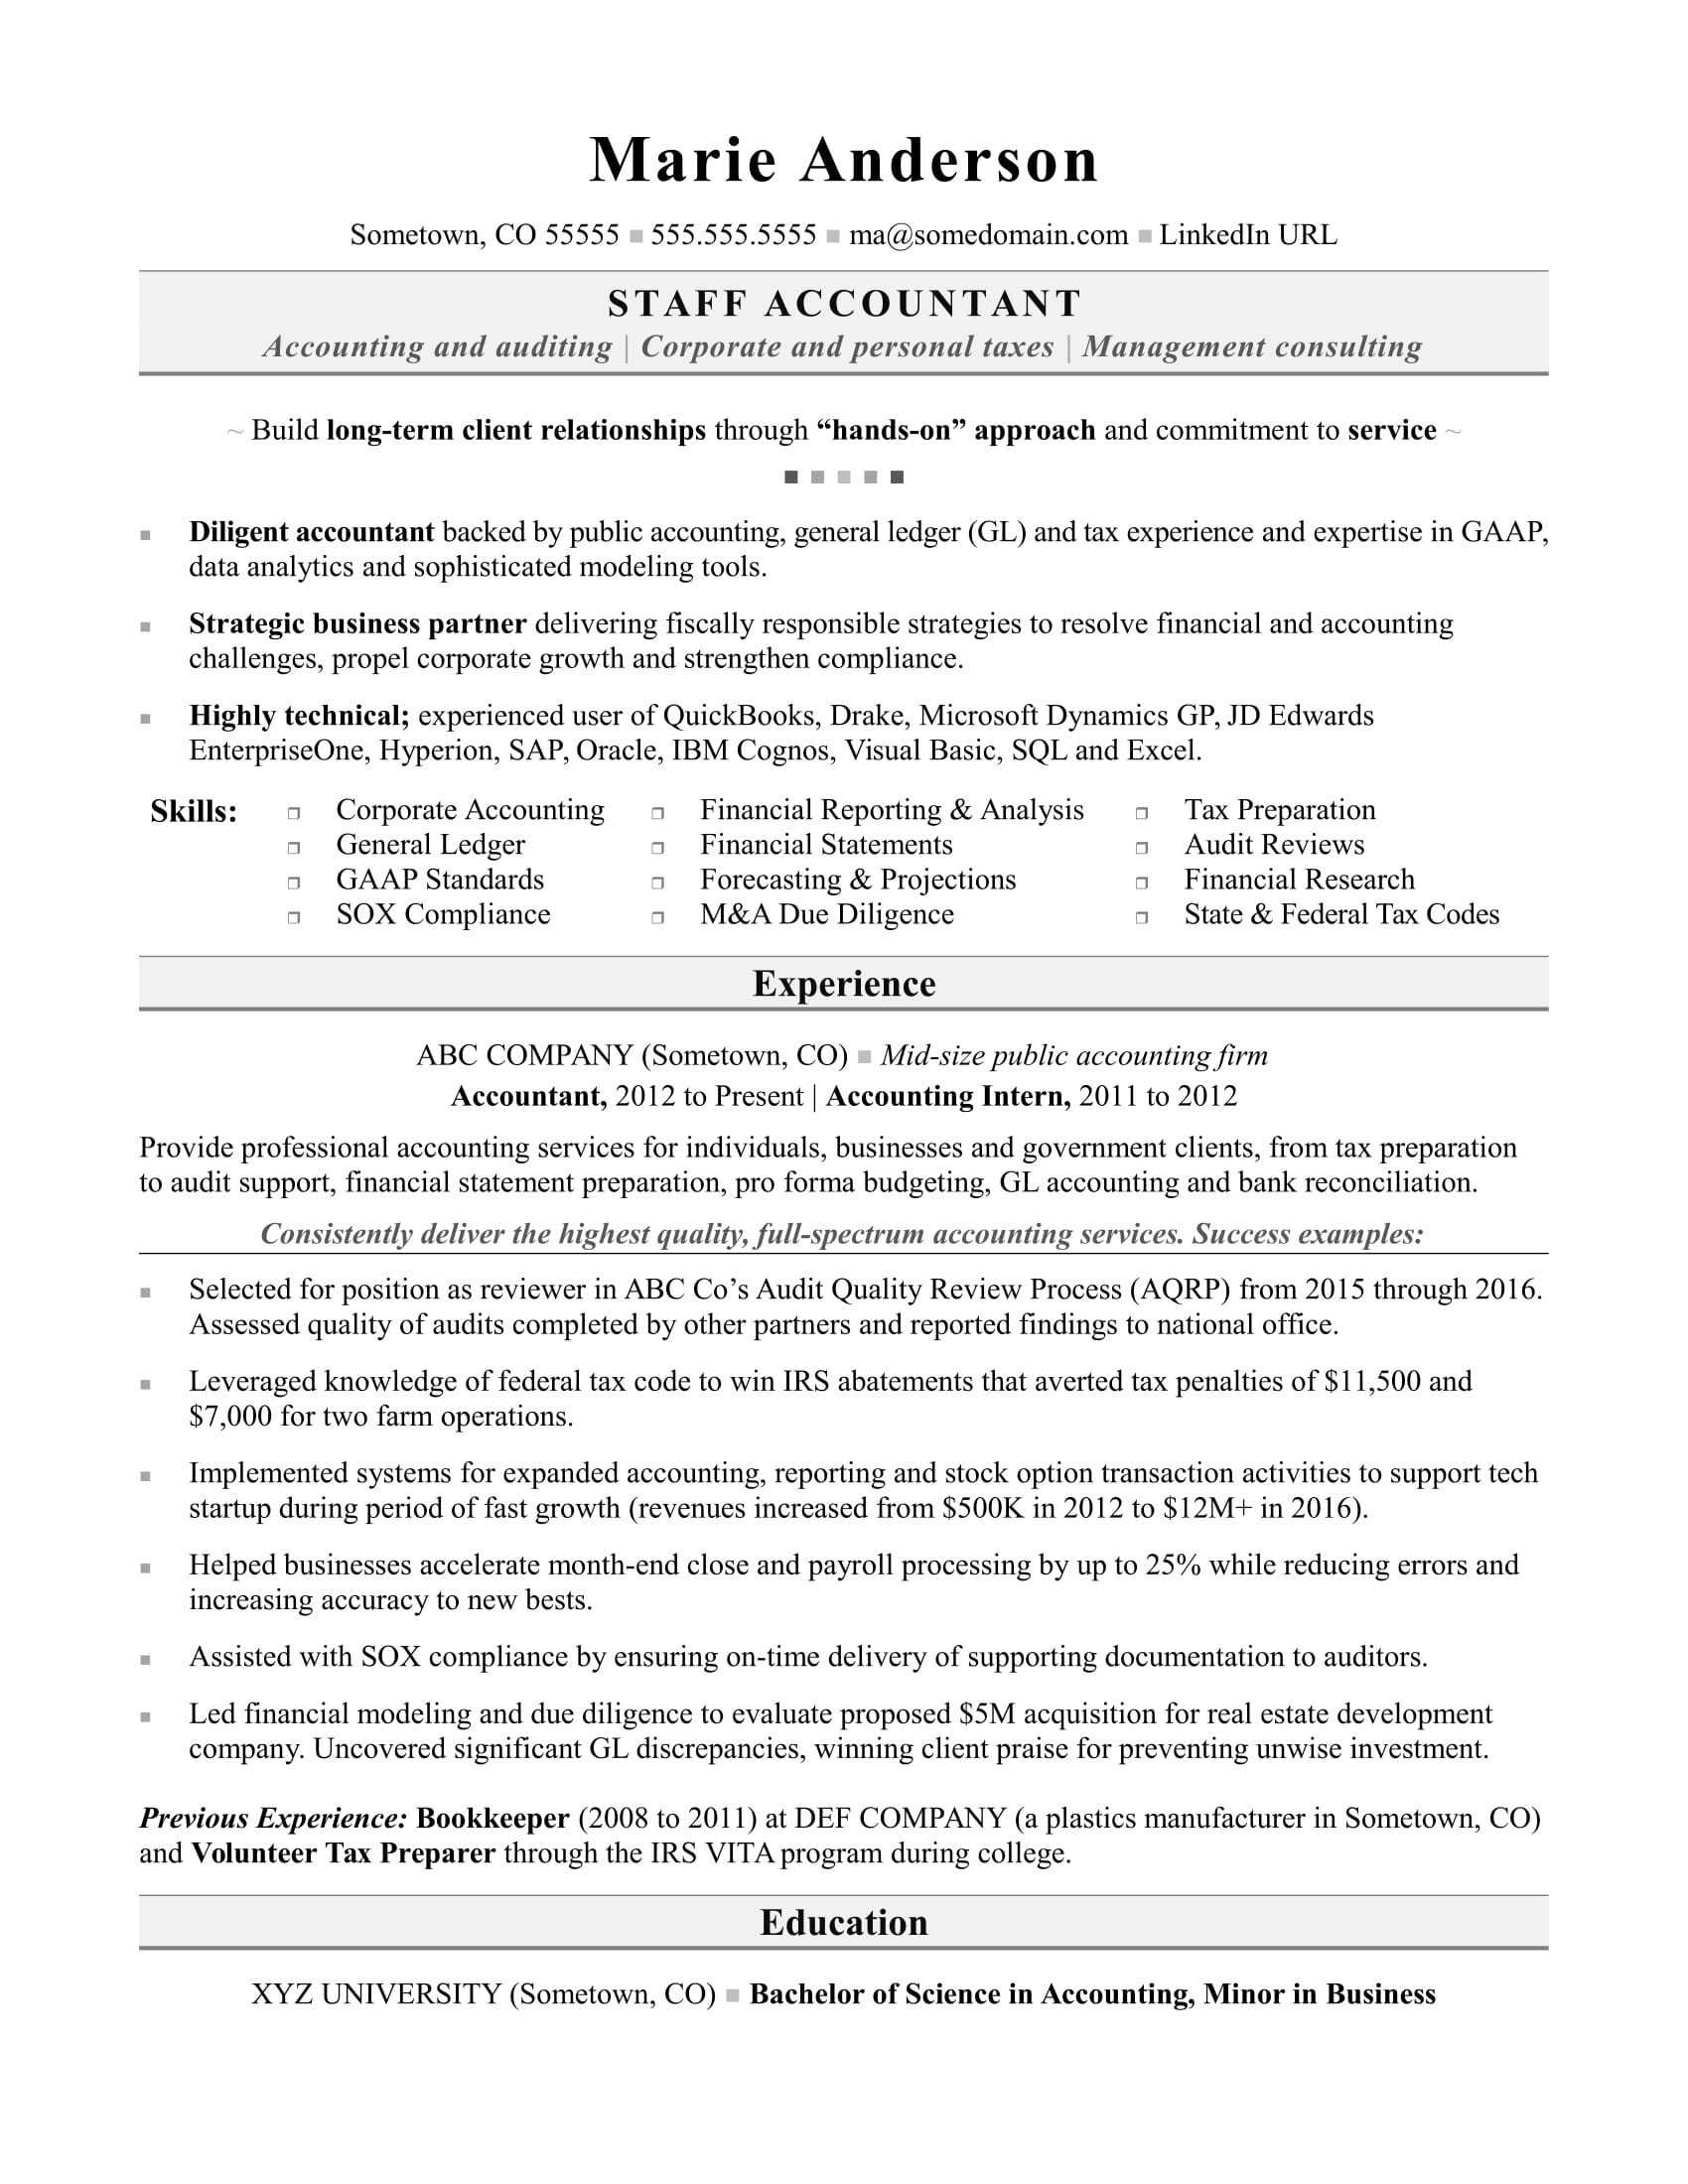 Sample Resume Accounting Promotion In the Same Company Accountant Resume Monster.com